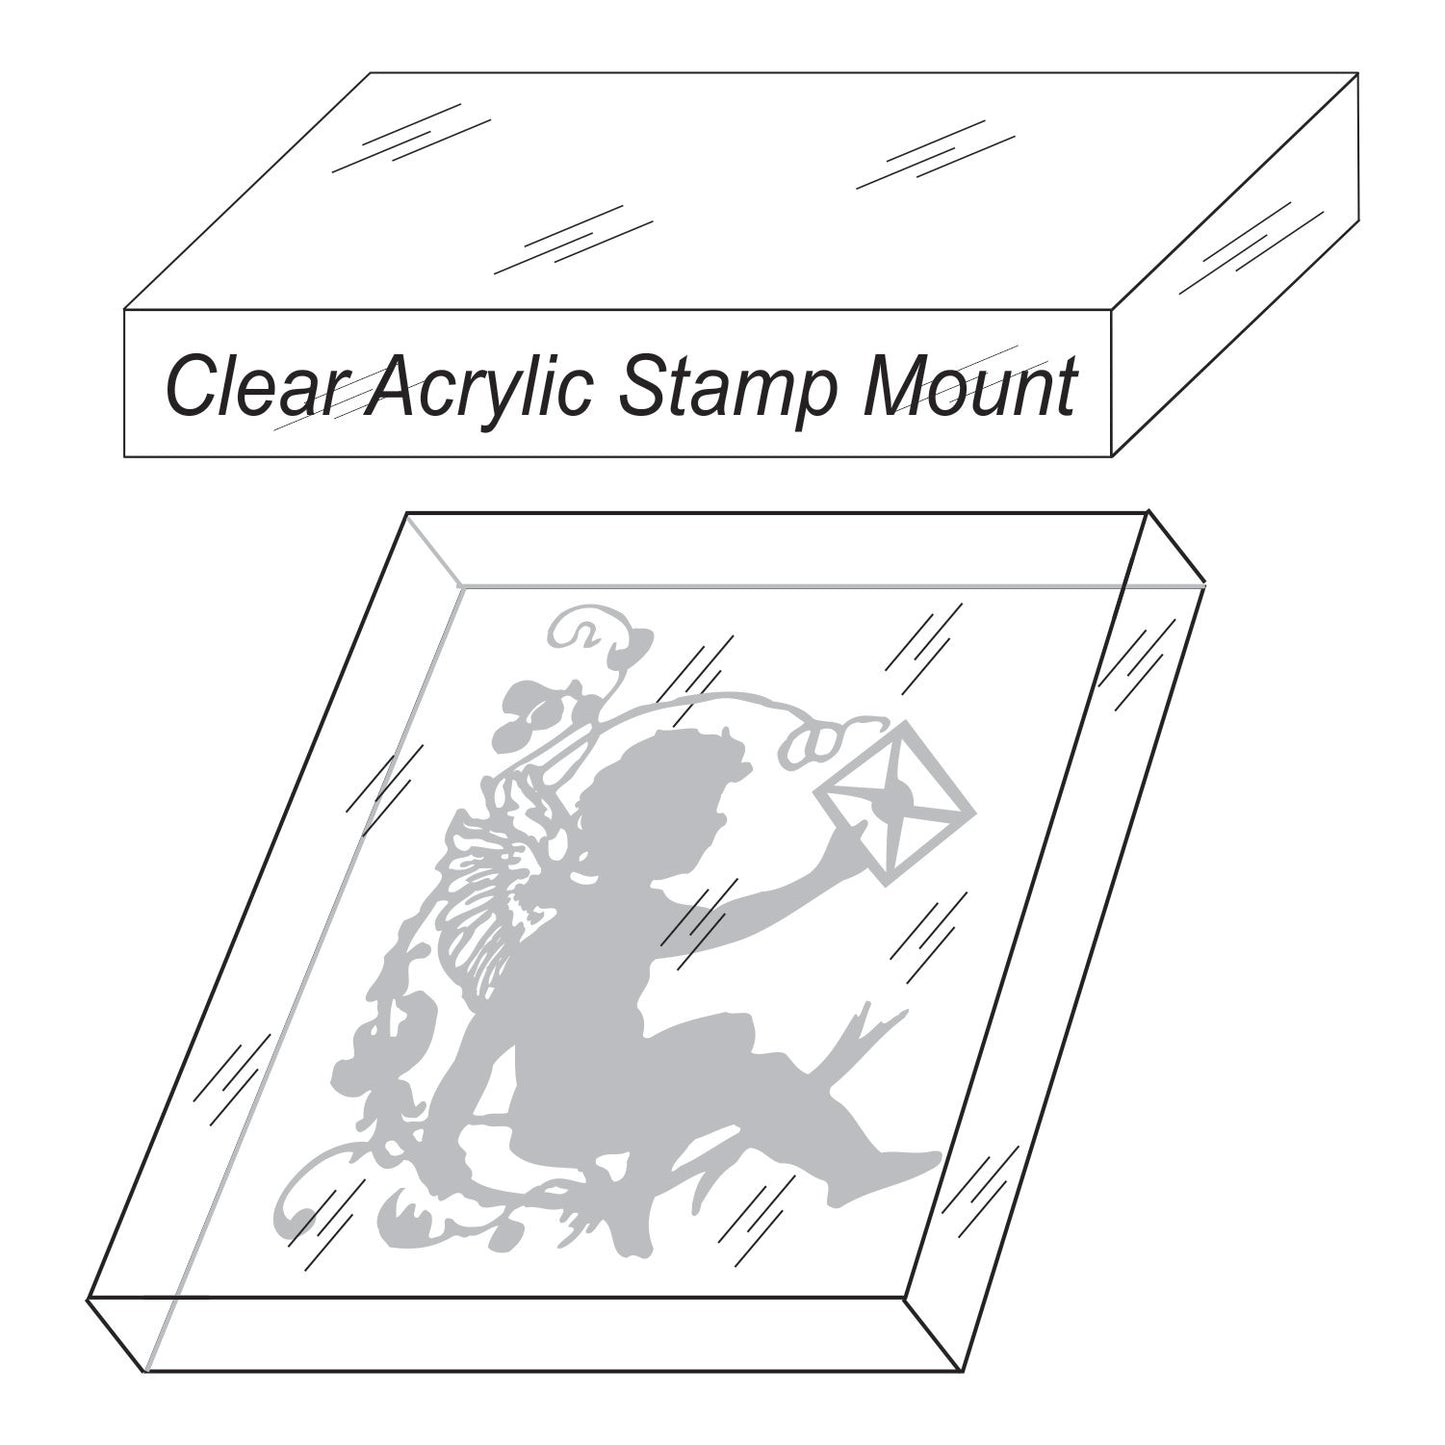 Acrylic Clear Stamp Mounts, 6" Length